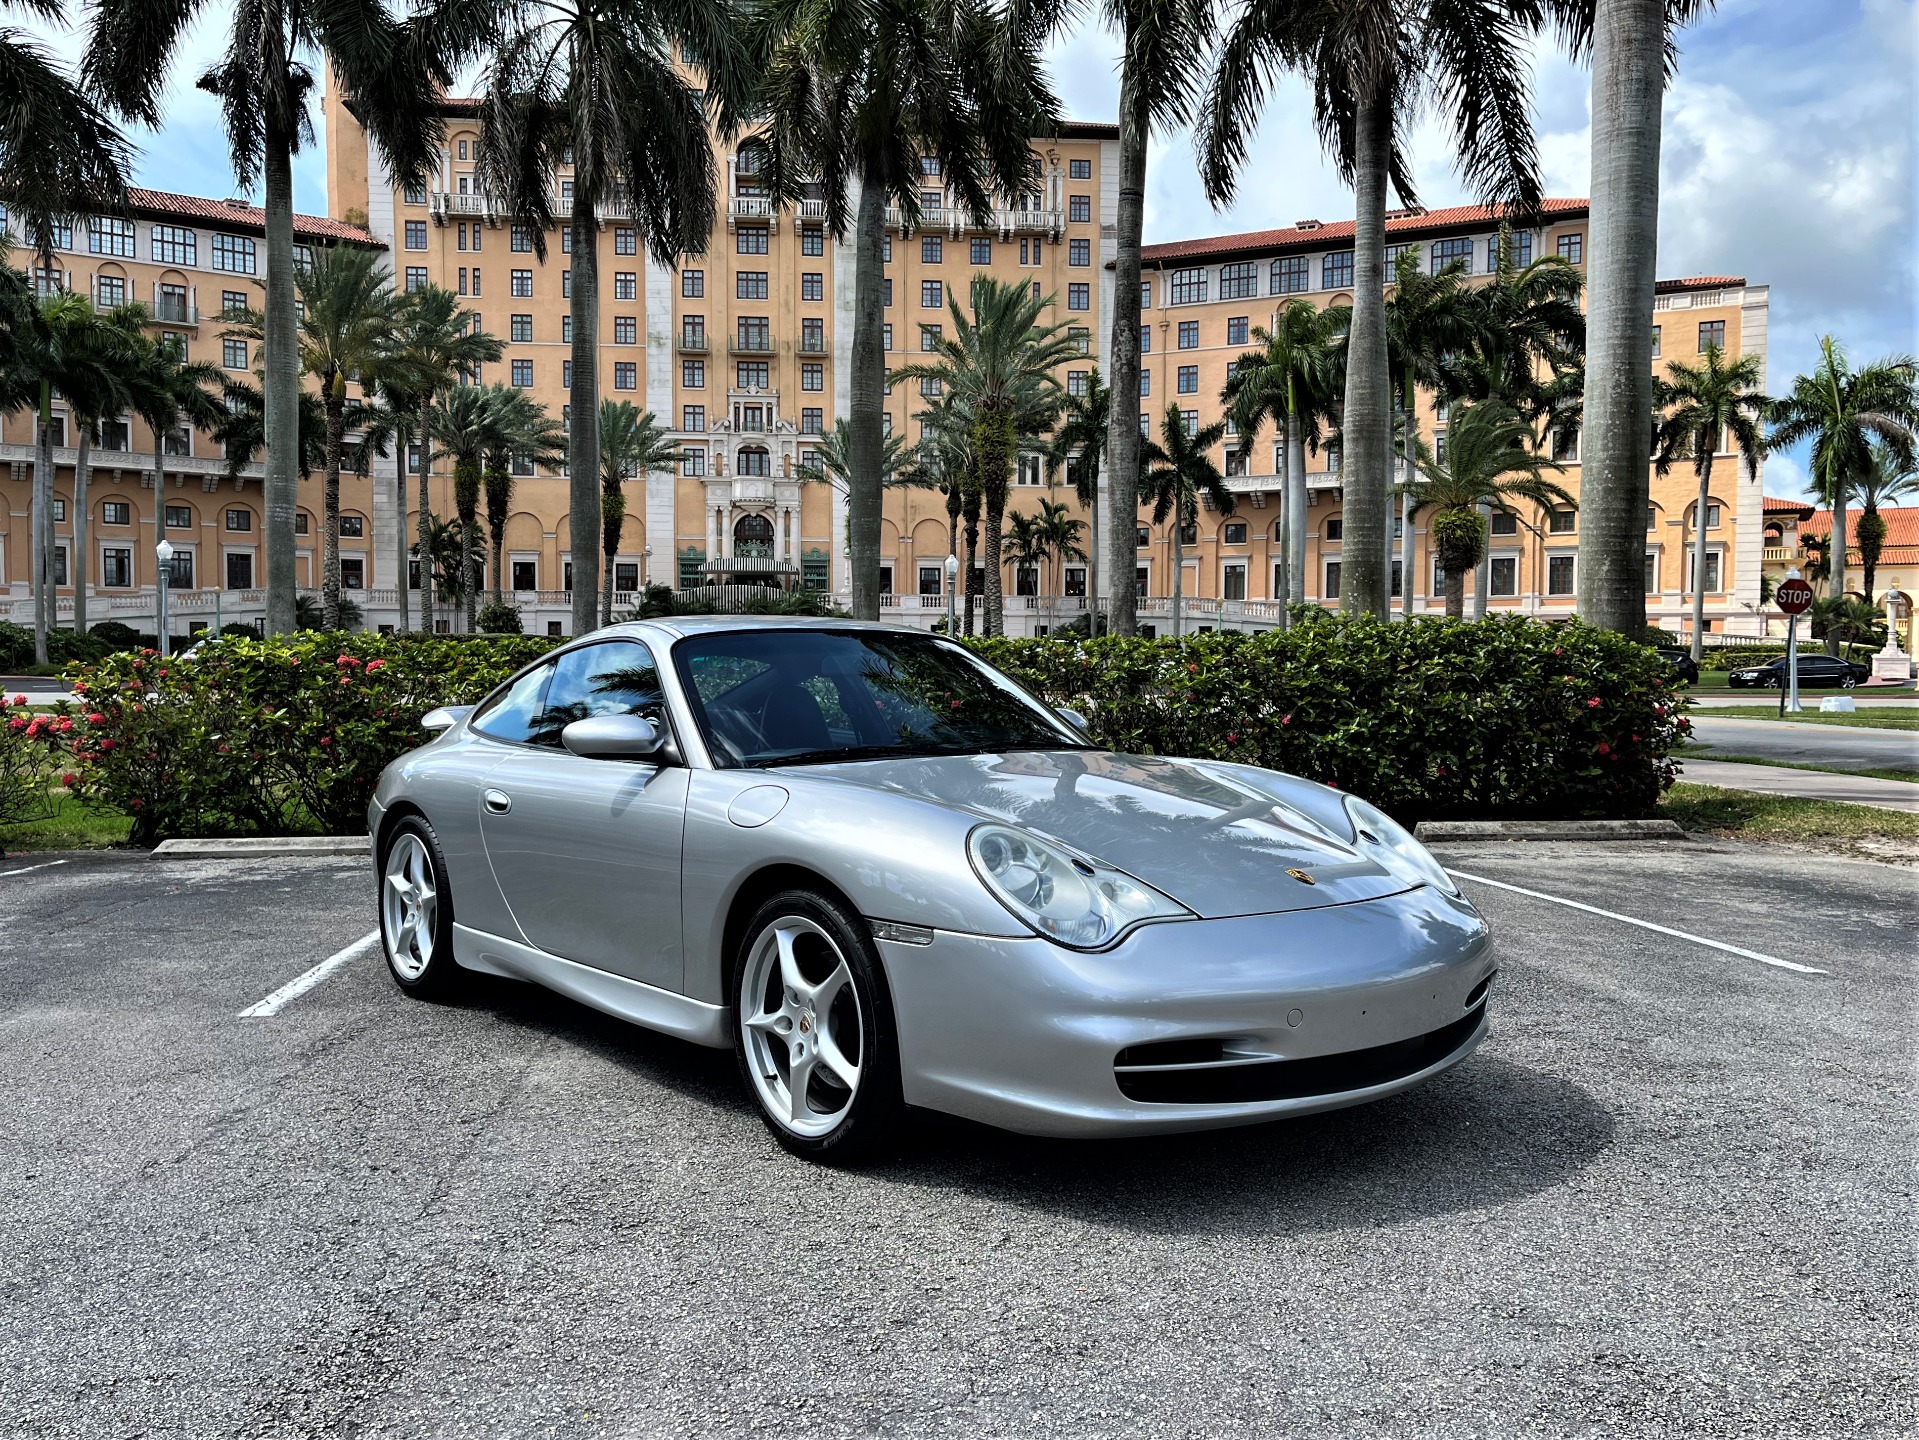 Used 2002 Porsche 911 Carrera for sale Sold at The Gables Sports Cars in Miami FL 33146 3